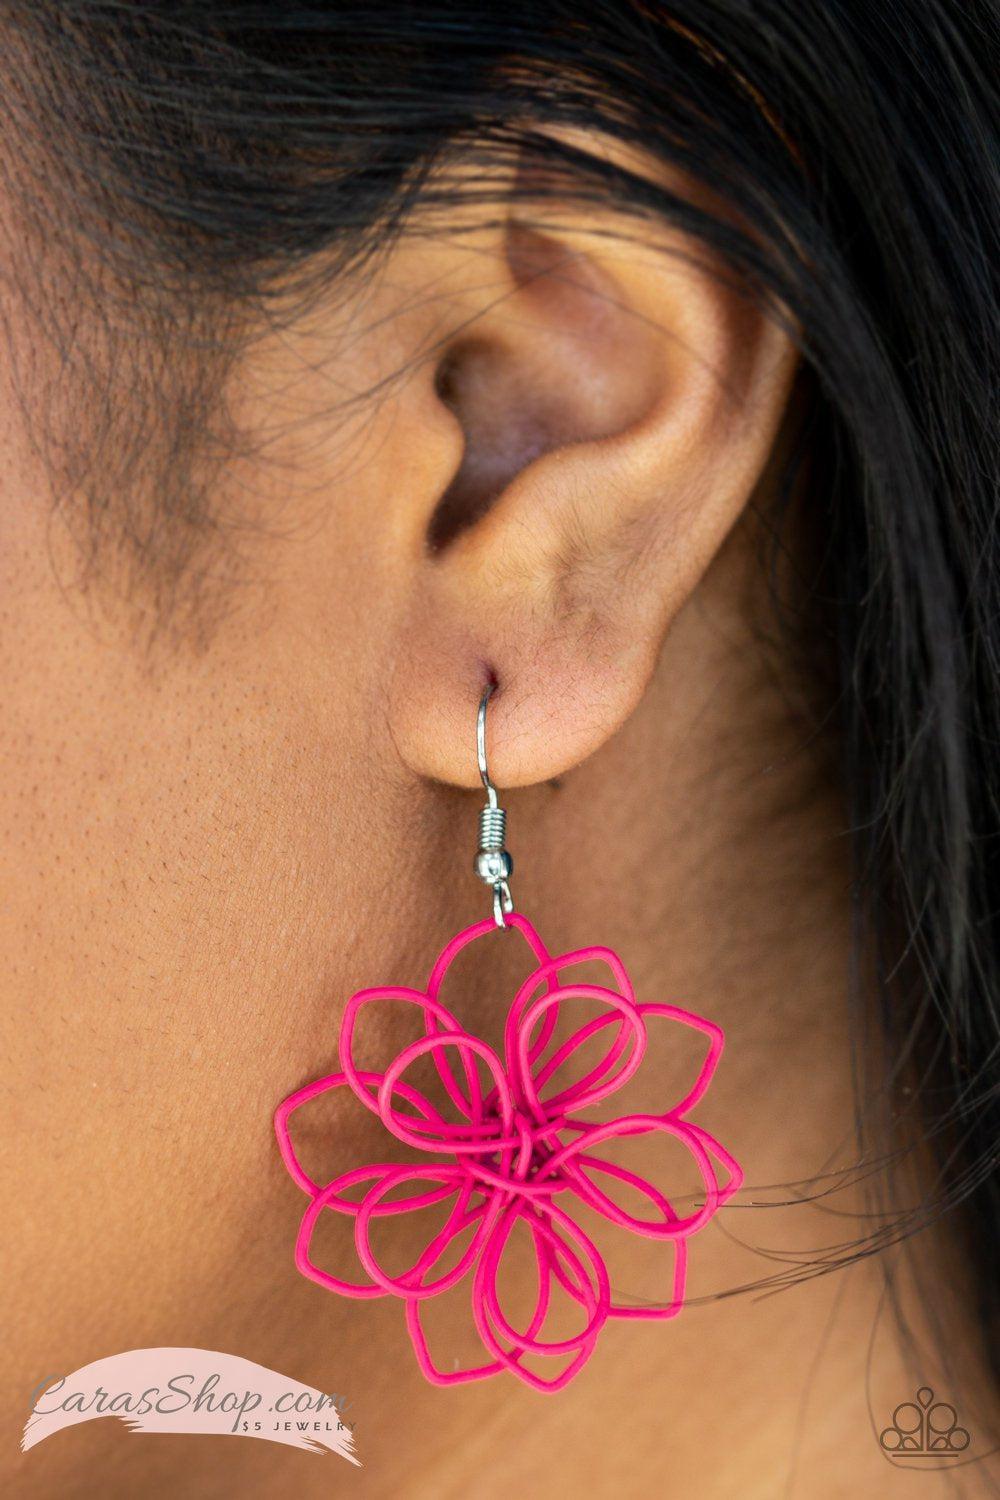 Springtime Serenity - Pink Flower Earrings - Paparazzi Accessories-CarasShop.com - $5 Jewelry by Cara Jewels